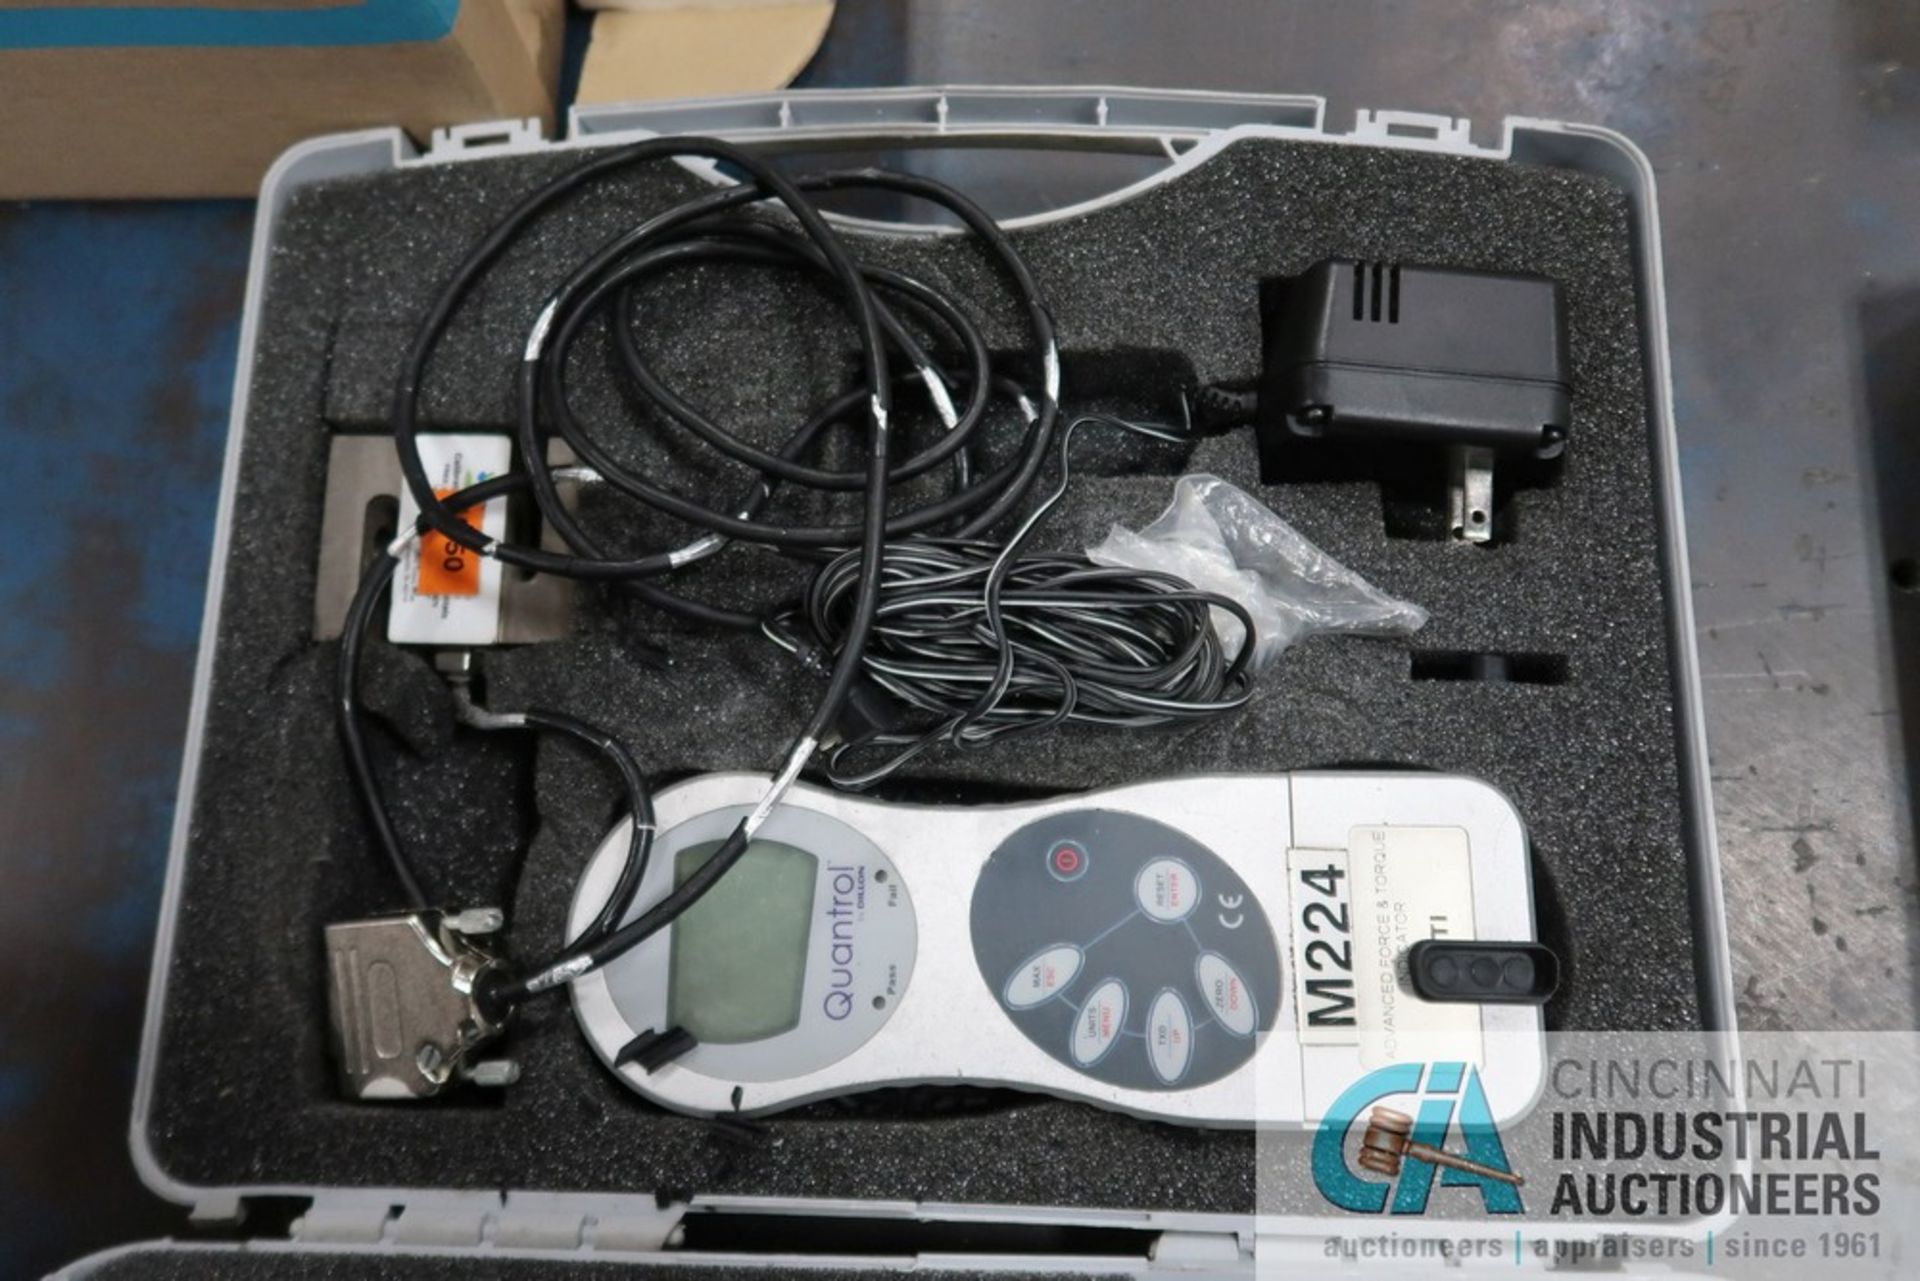 (LOT) MISCELLANEOUS DIGITAL TEST AND MONITORING EQUIPMENT - Image 3 of 3